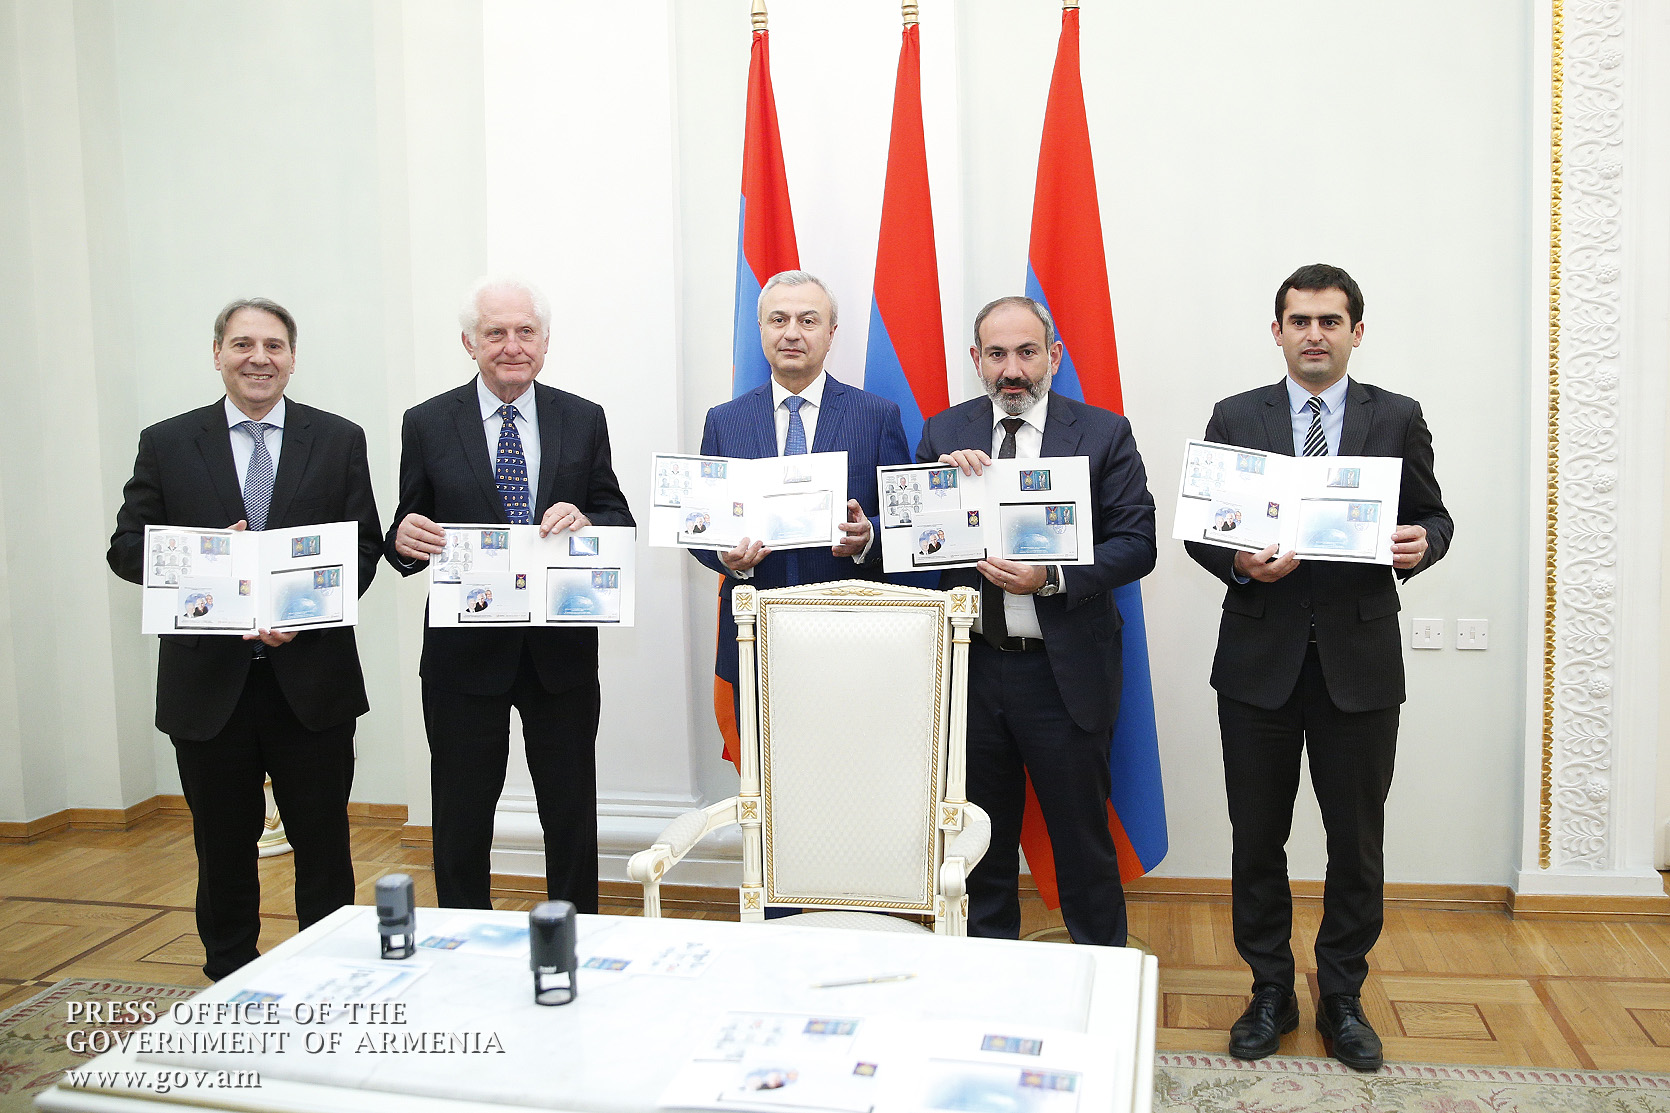 Two new postage stamps and the Special Cover dedicated to the theme ‘State Award of the Republic of Armenia for Global Contribution in IT sphere’